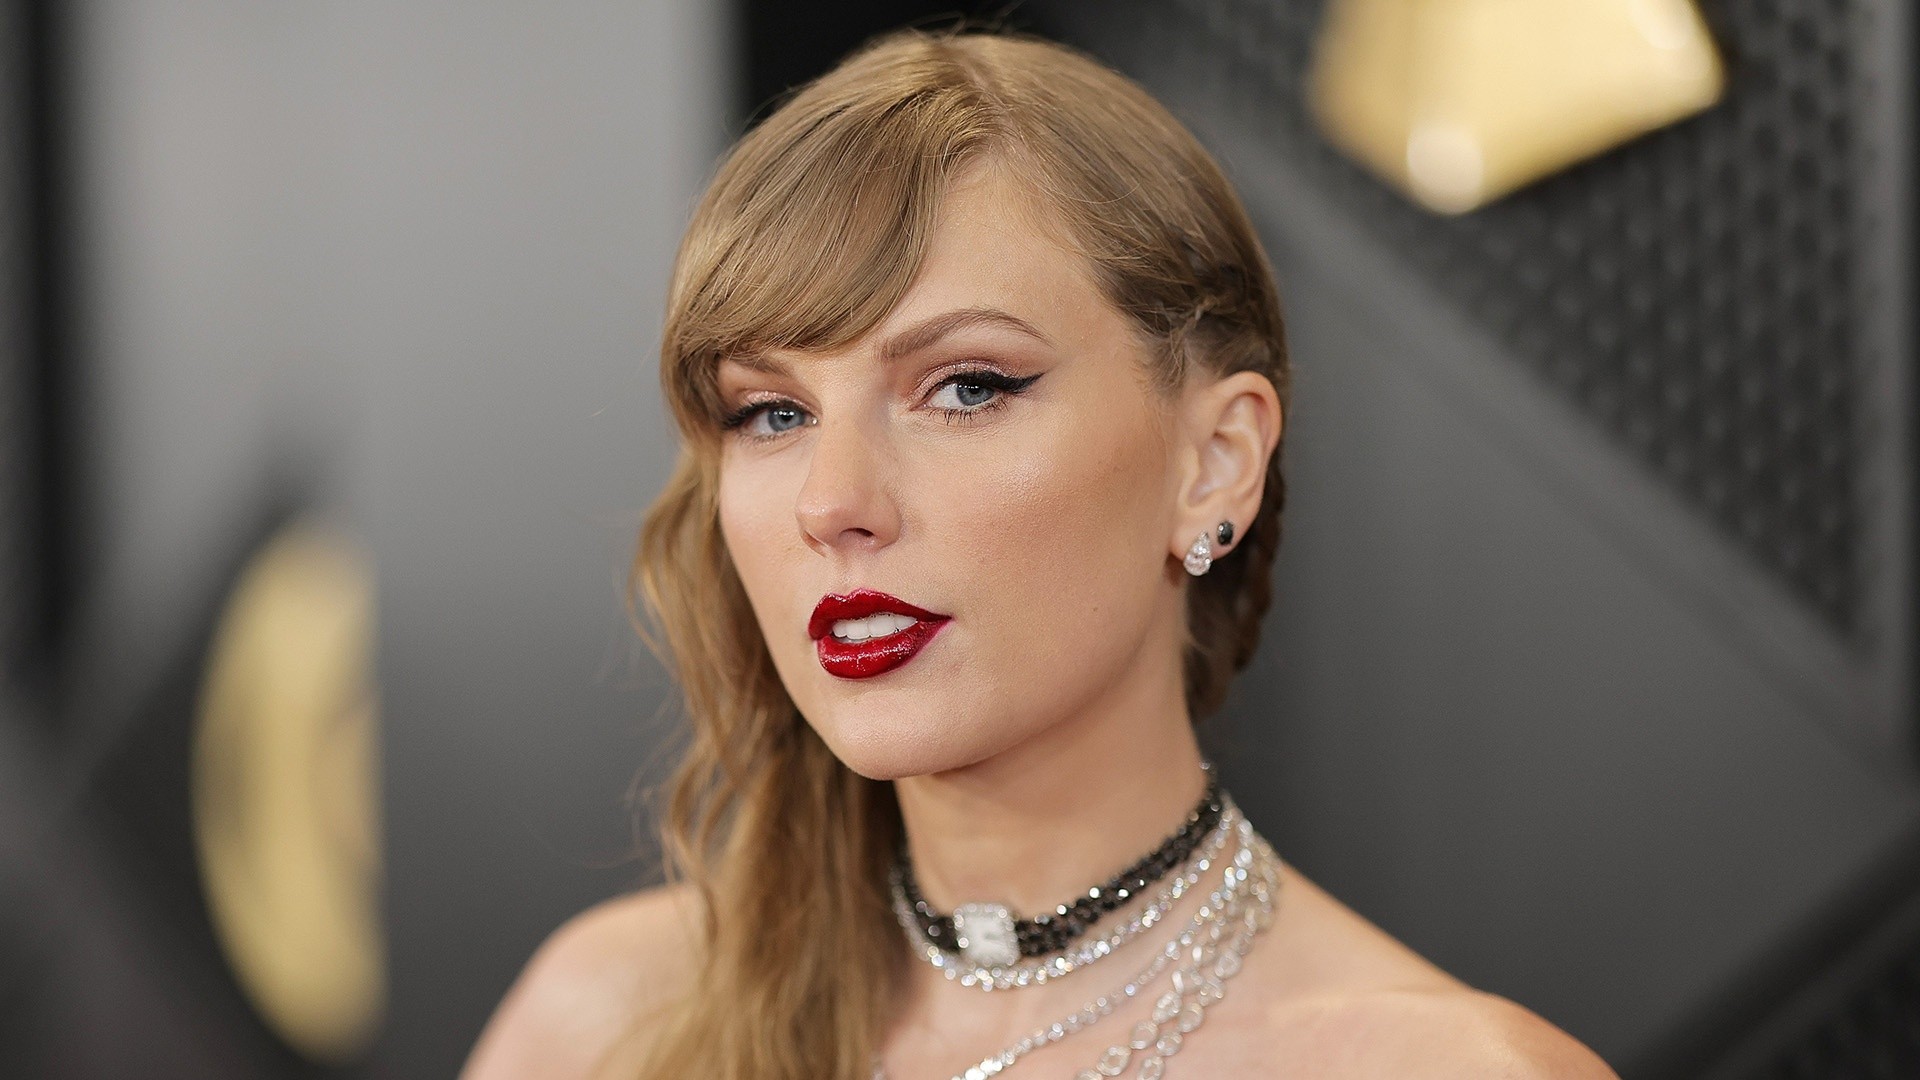 Taylor Swift reveals track list, collabs for new album